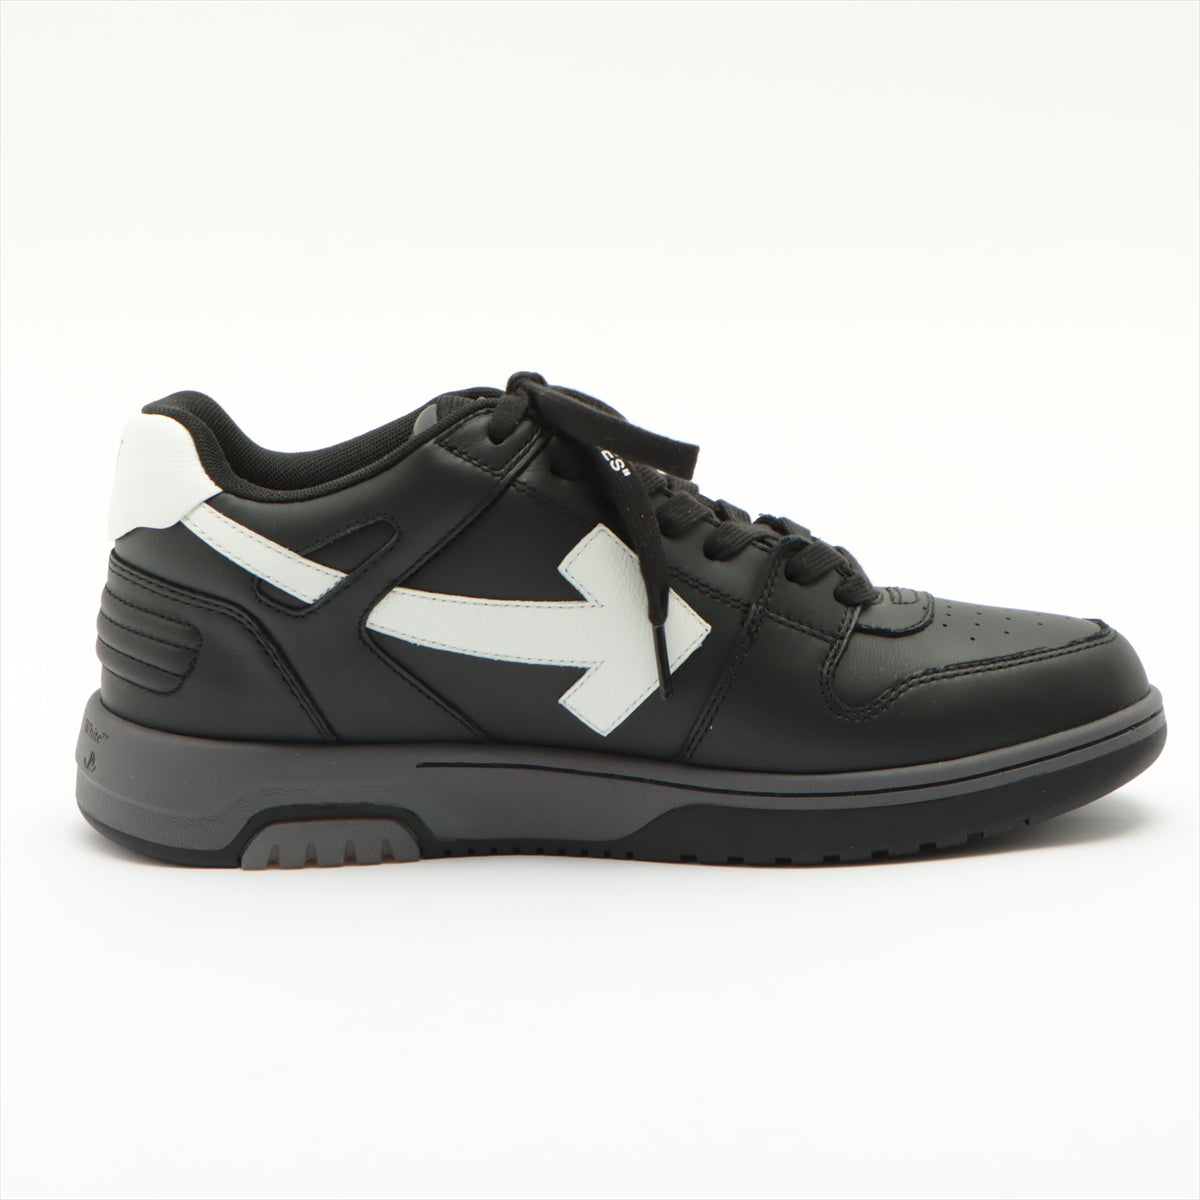 Off-White Leather Sneakers 42 Men's Black